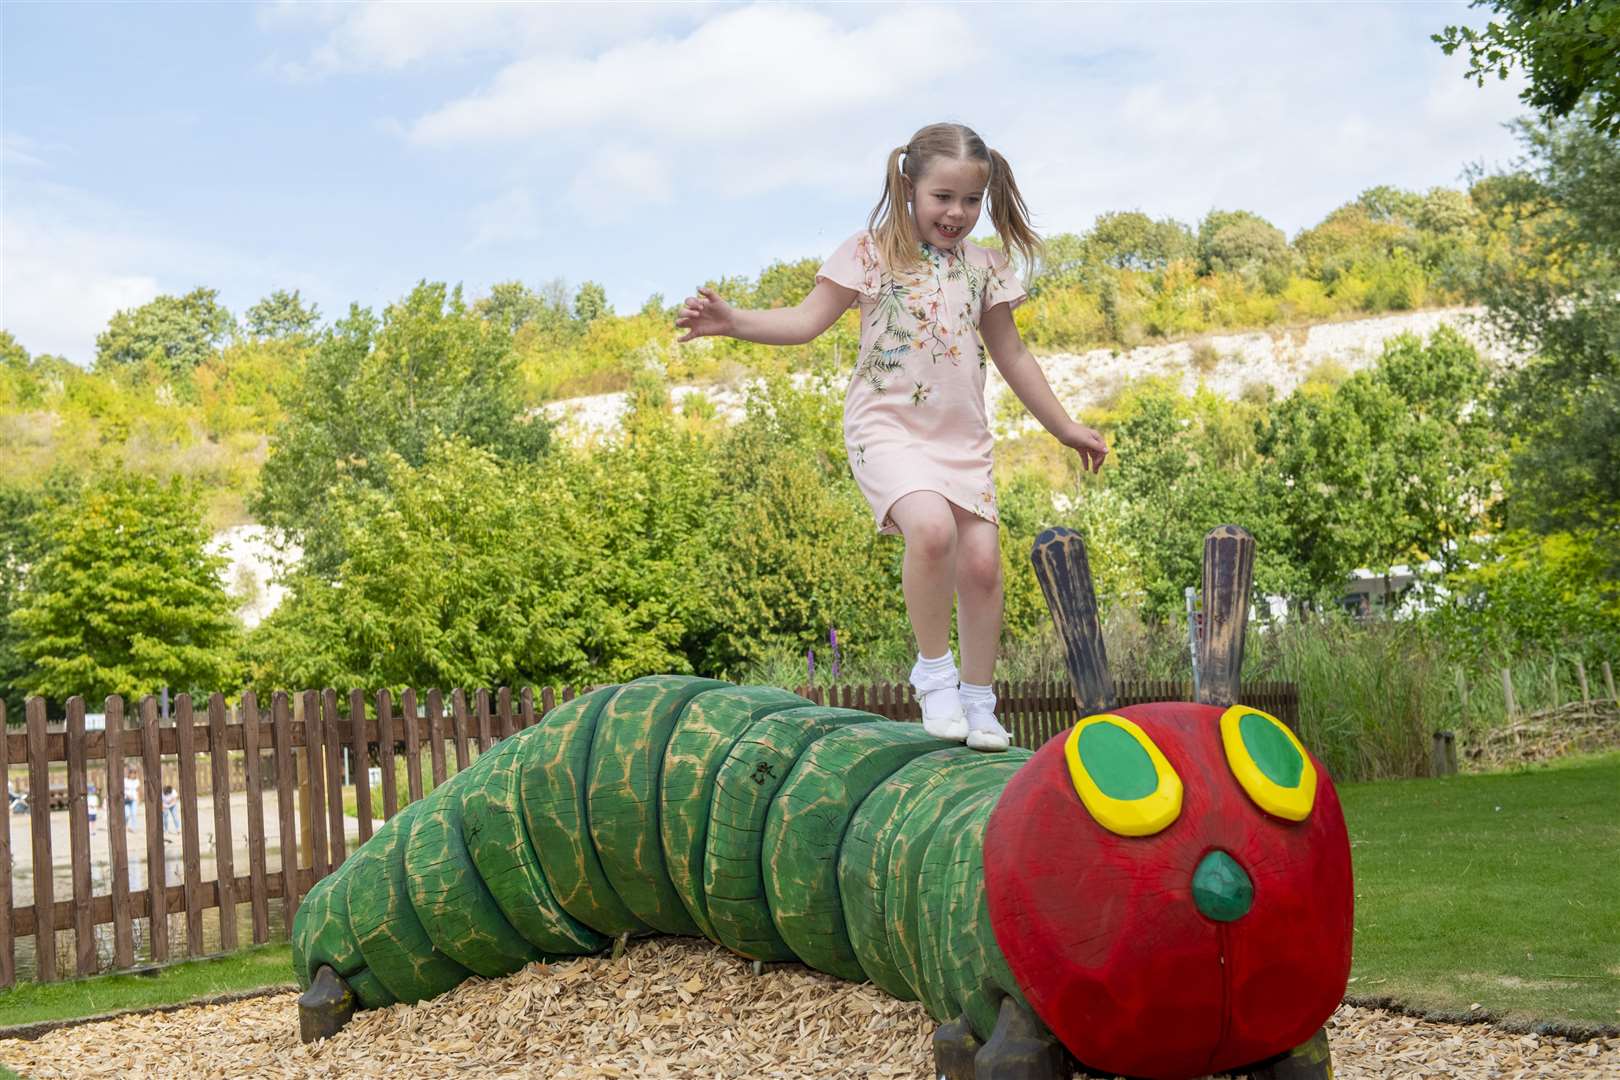 Don't miss The Hungry Caterpillar sculpture at Bluewater